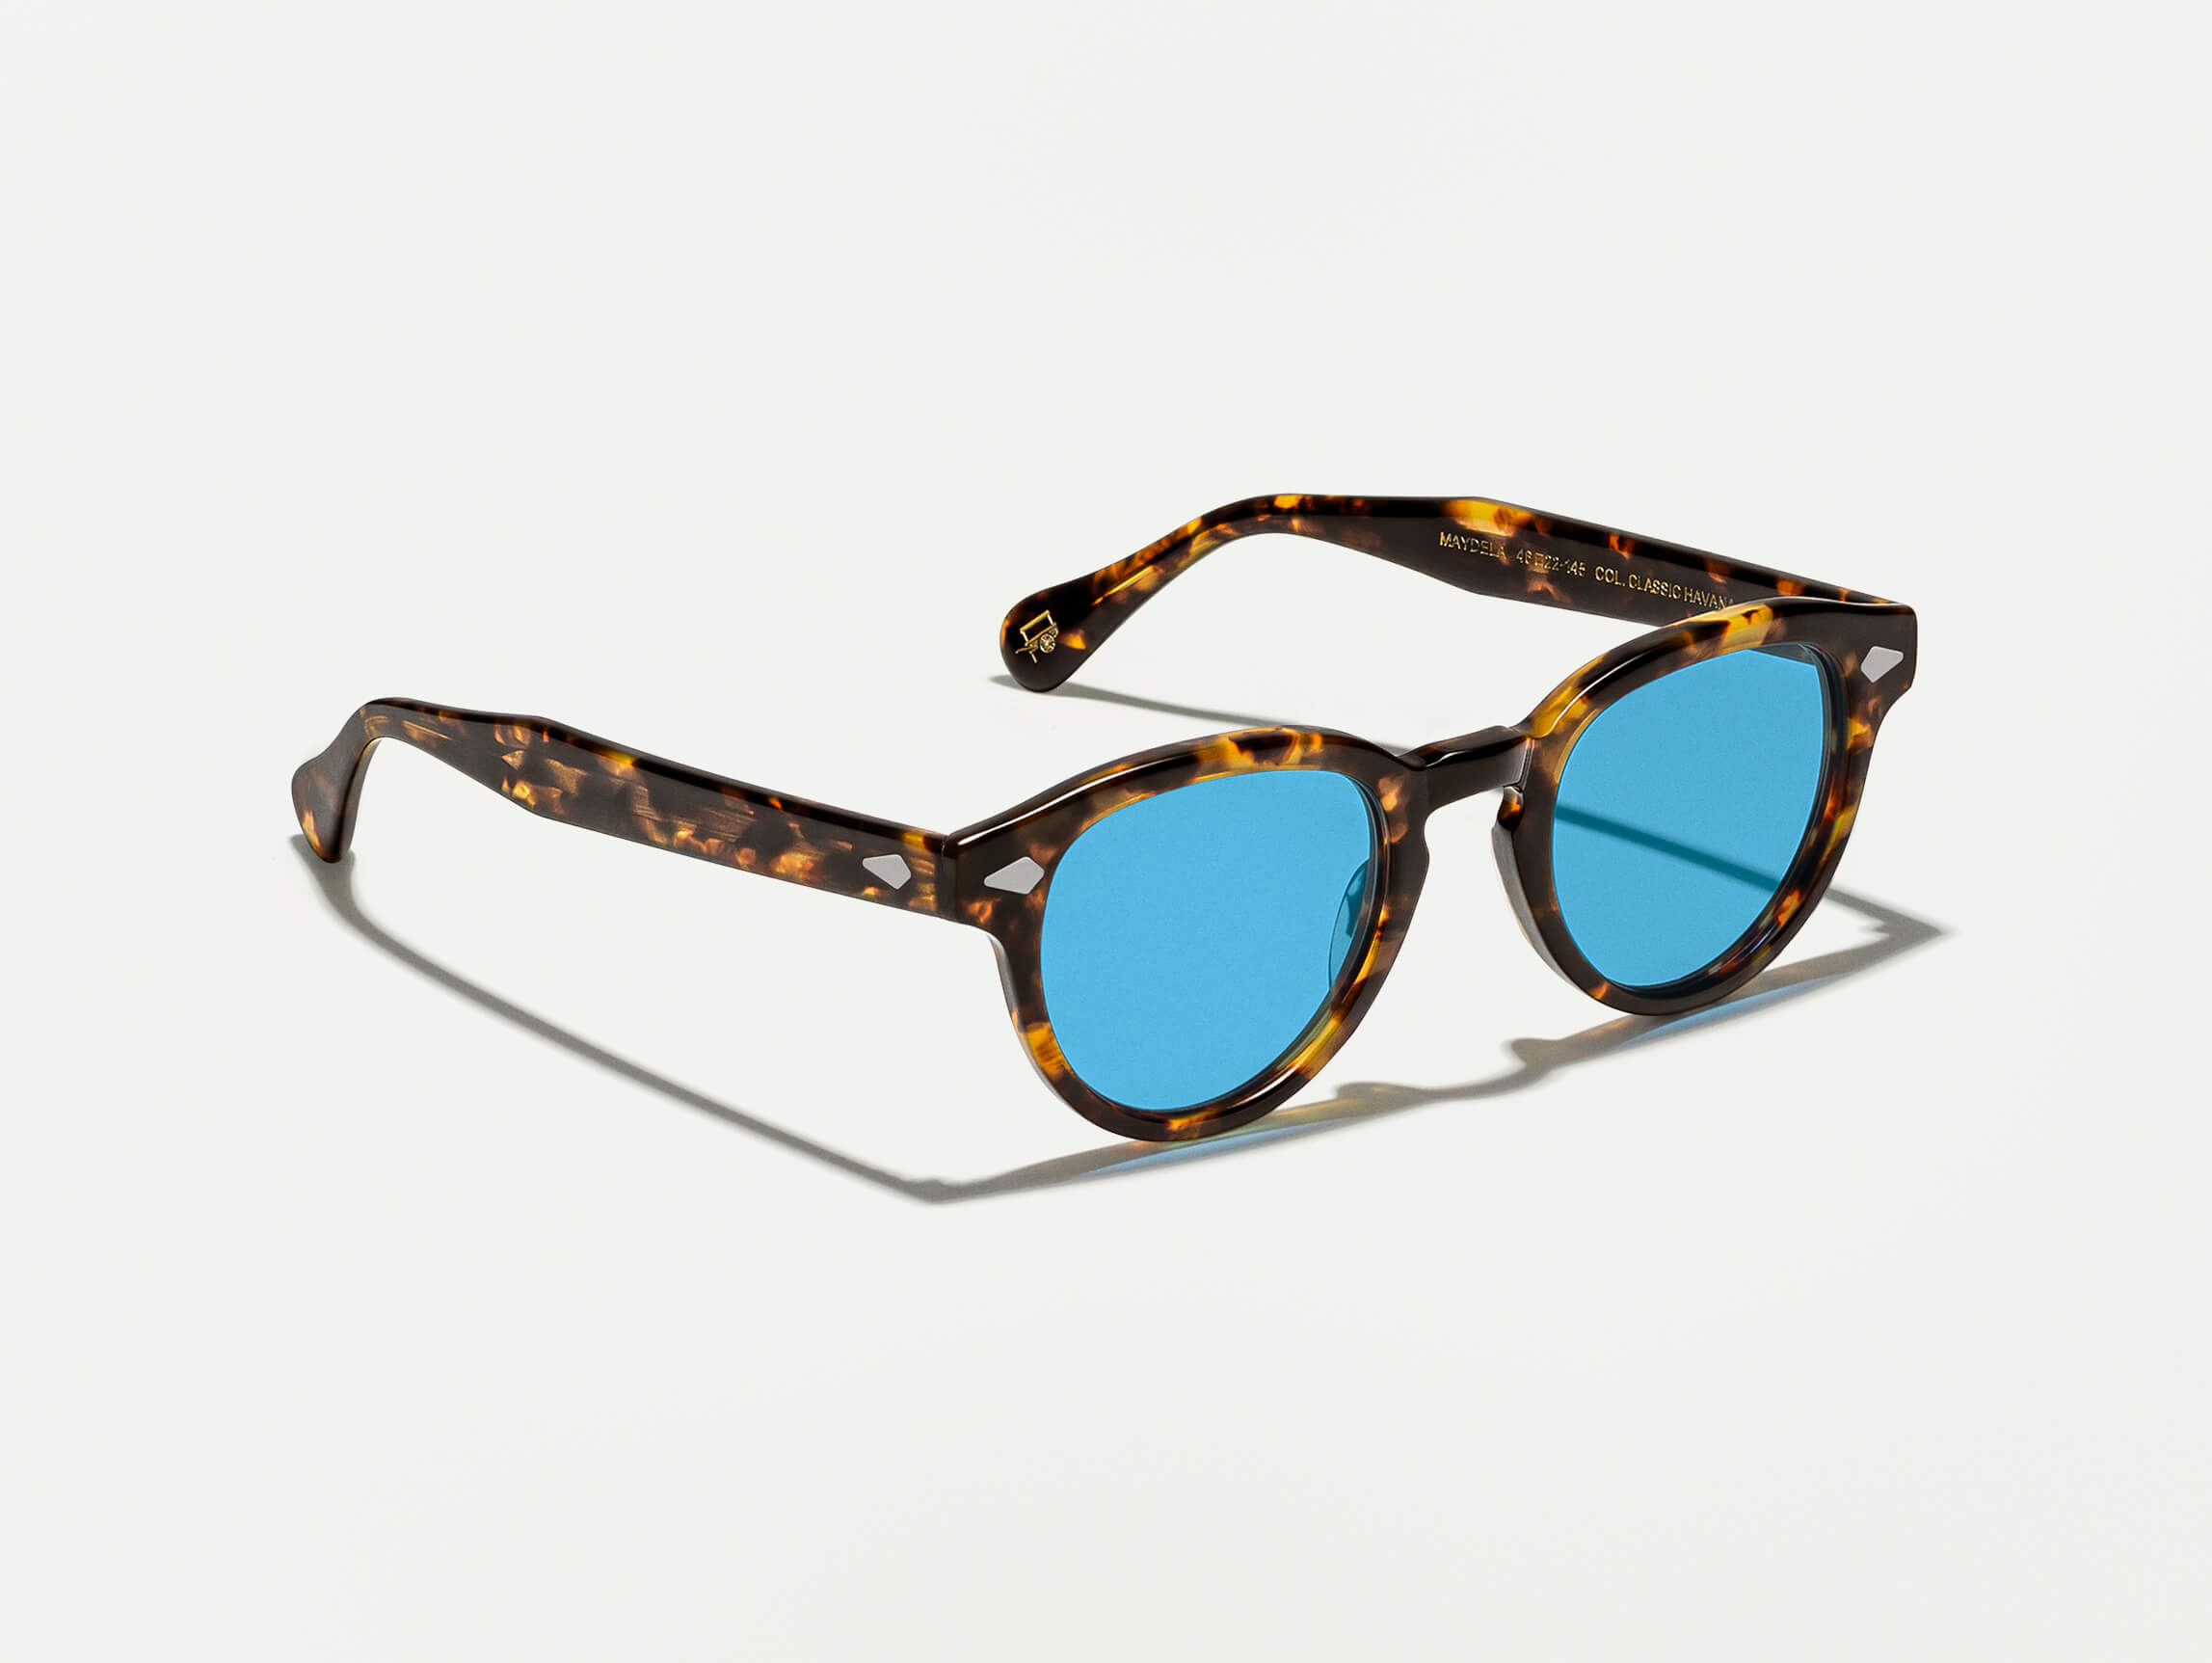 The MAYDELA SUN in Classic Havana with Celebrity Blue Tinted Lenses